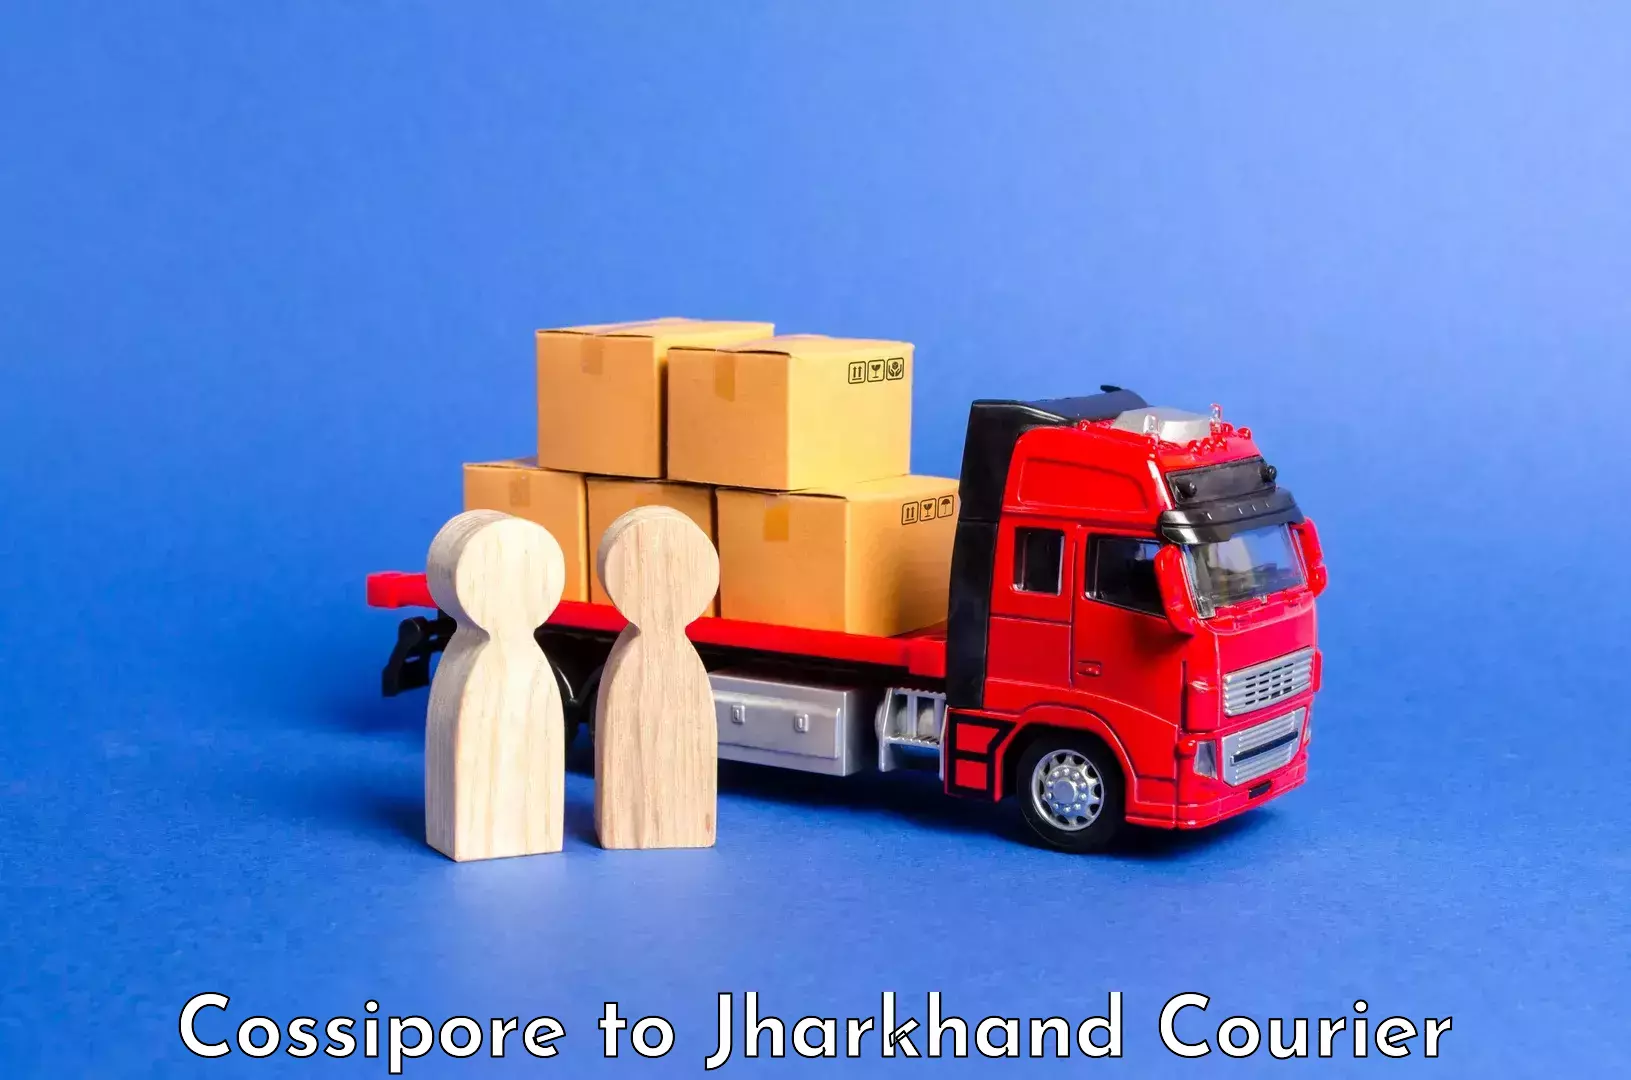 Baggage transport management Cossipore to Peterbar